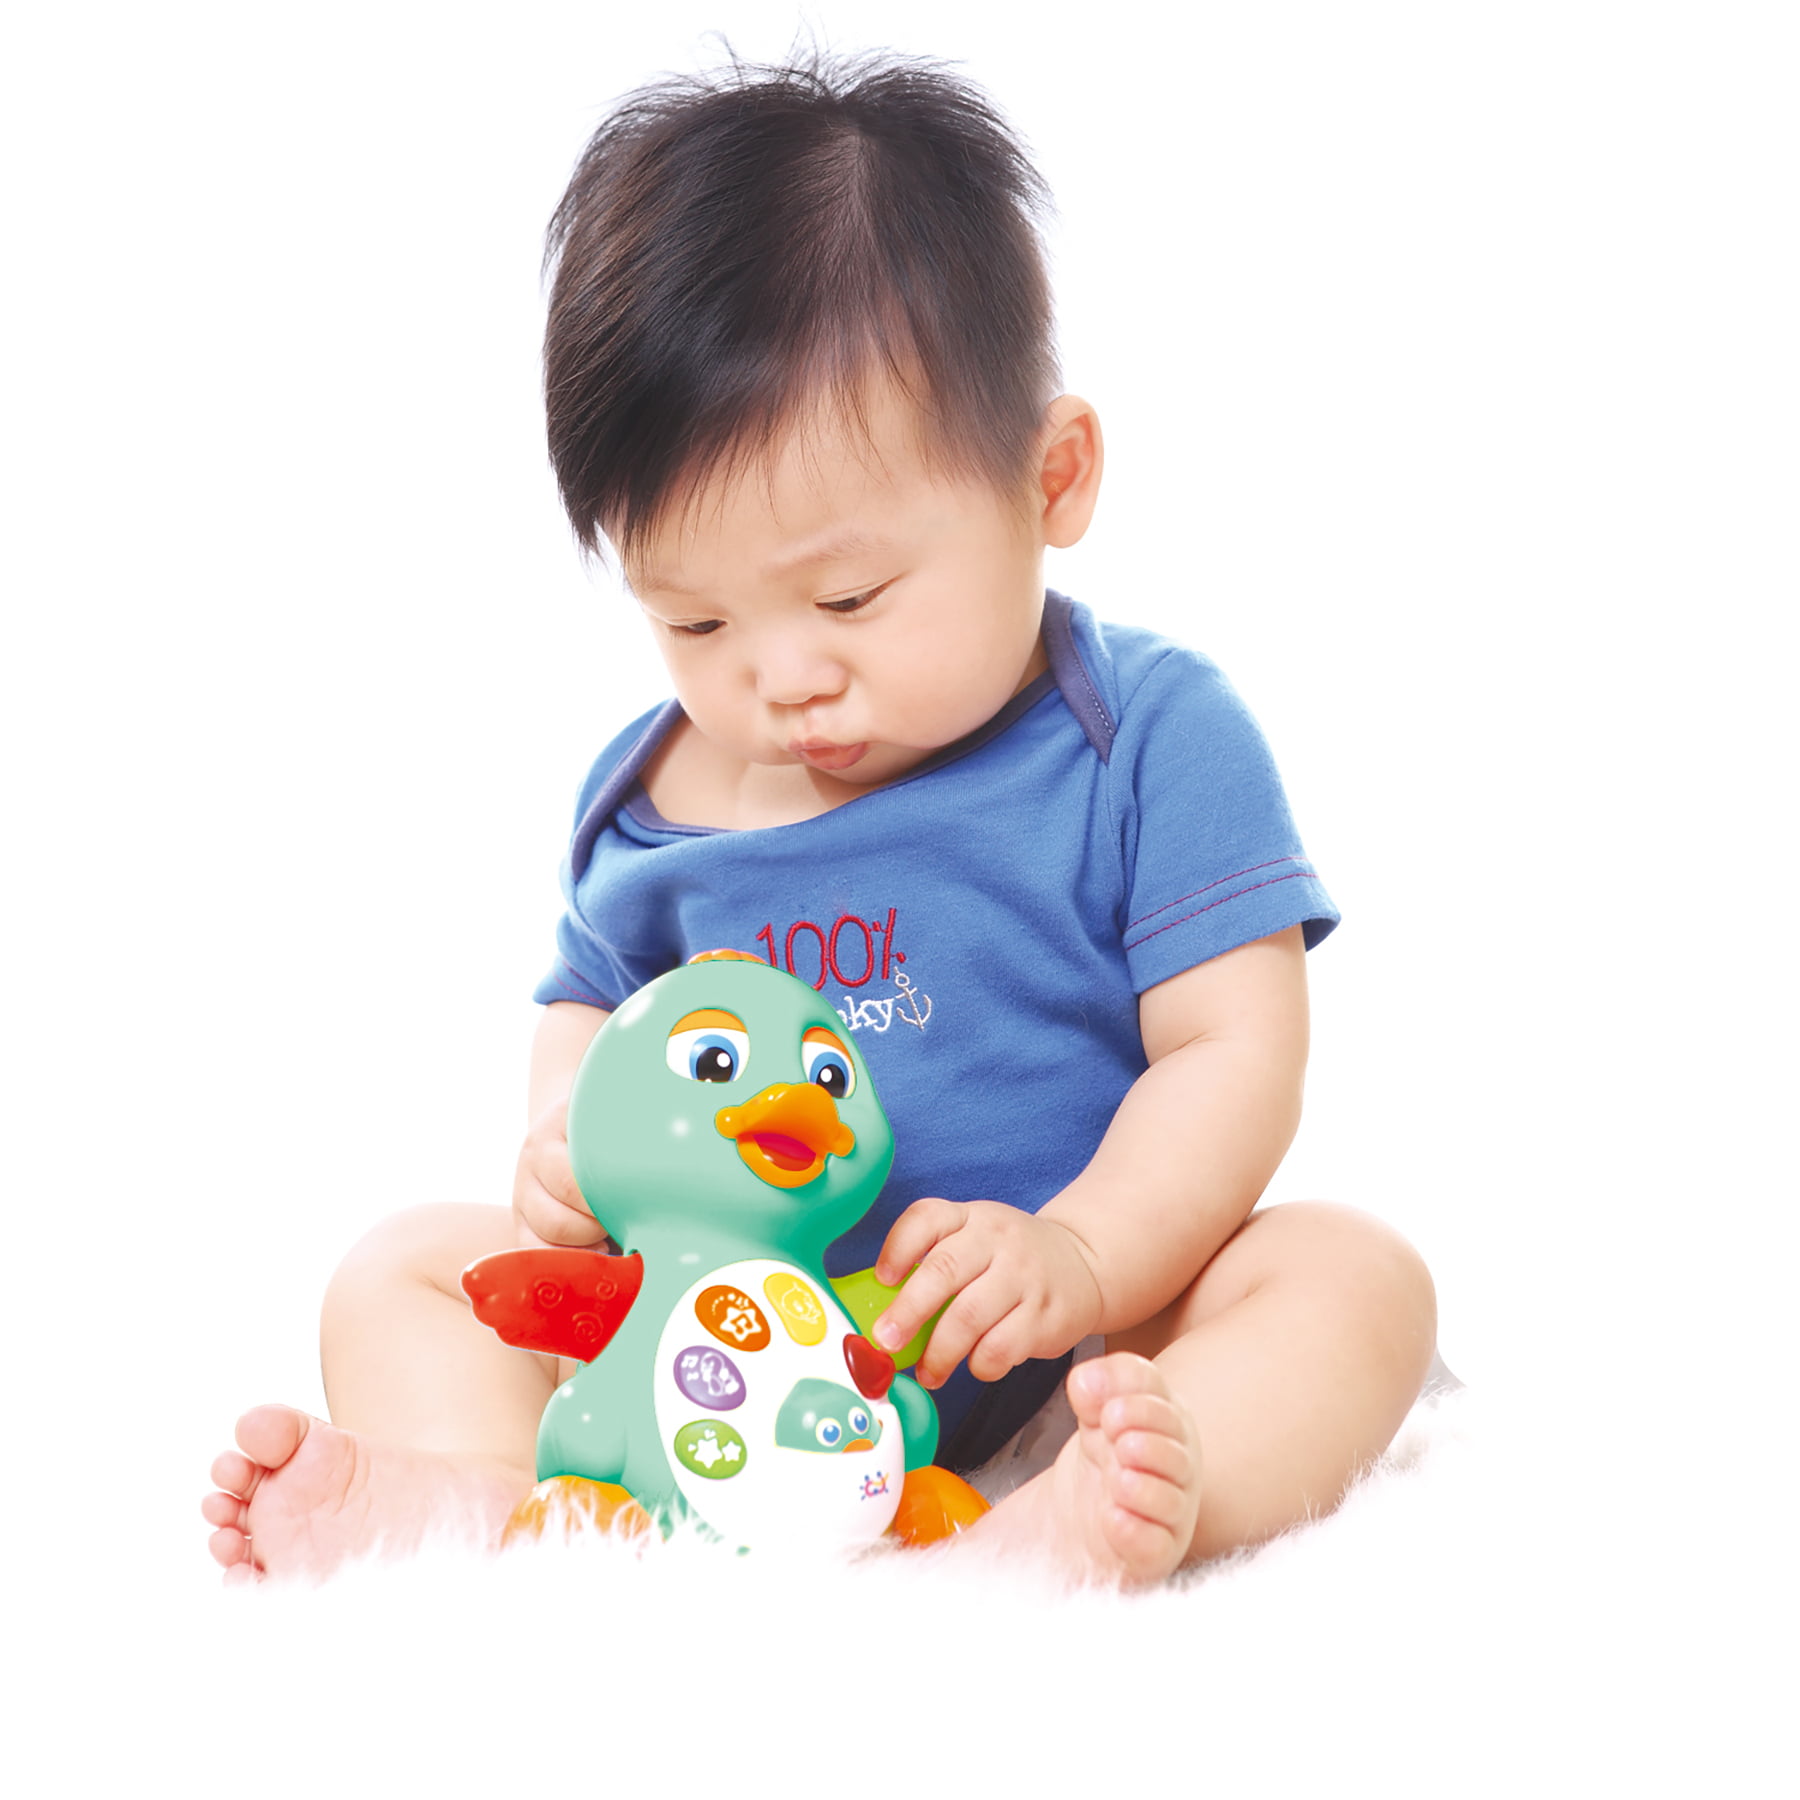 Lights Action Music Toy Infant Different Unique Games to Entertain and Help Develop Kids. Baby and Toddler Musical and Educational Toy JoyABit Light Up Dancing and Singing Duck Toy 